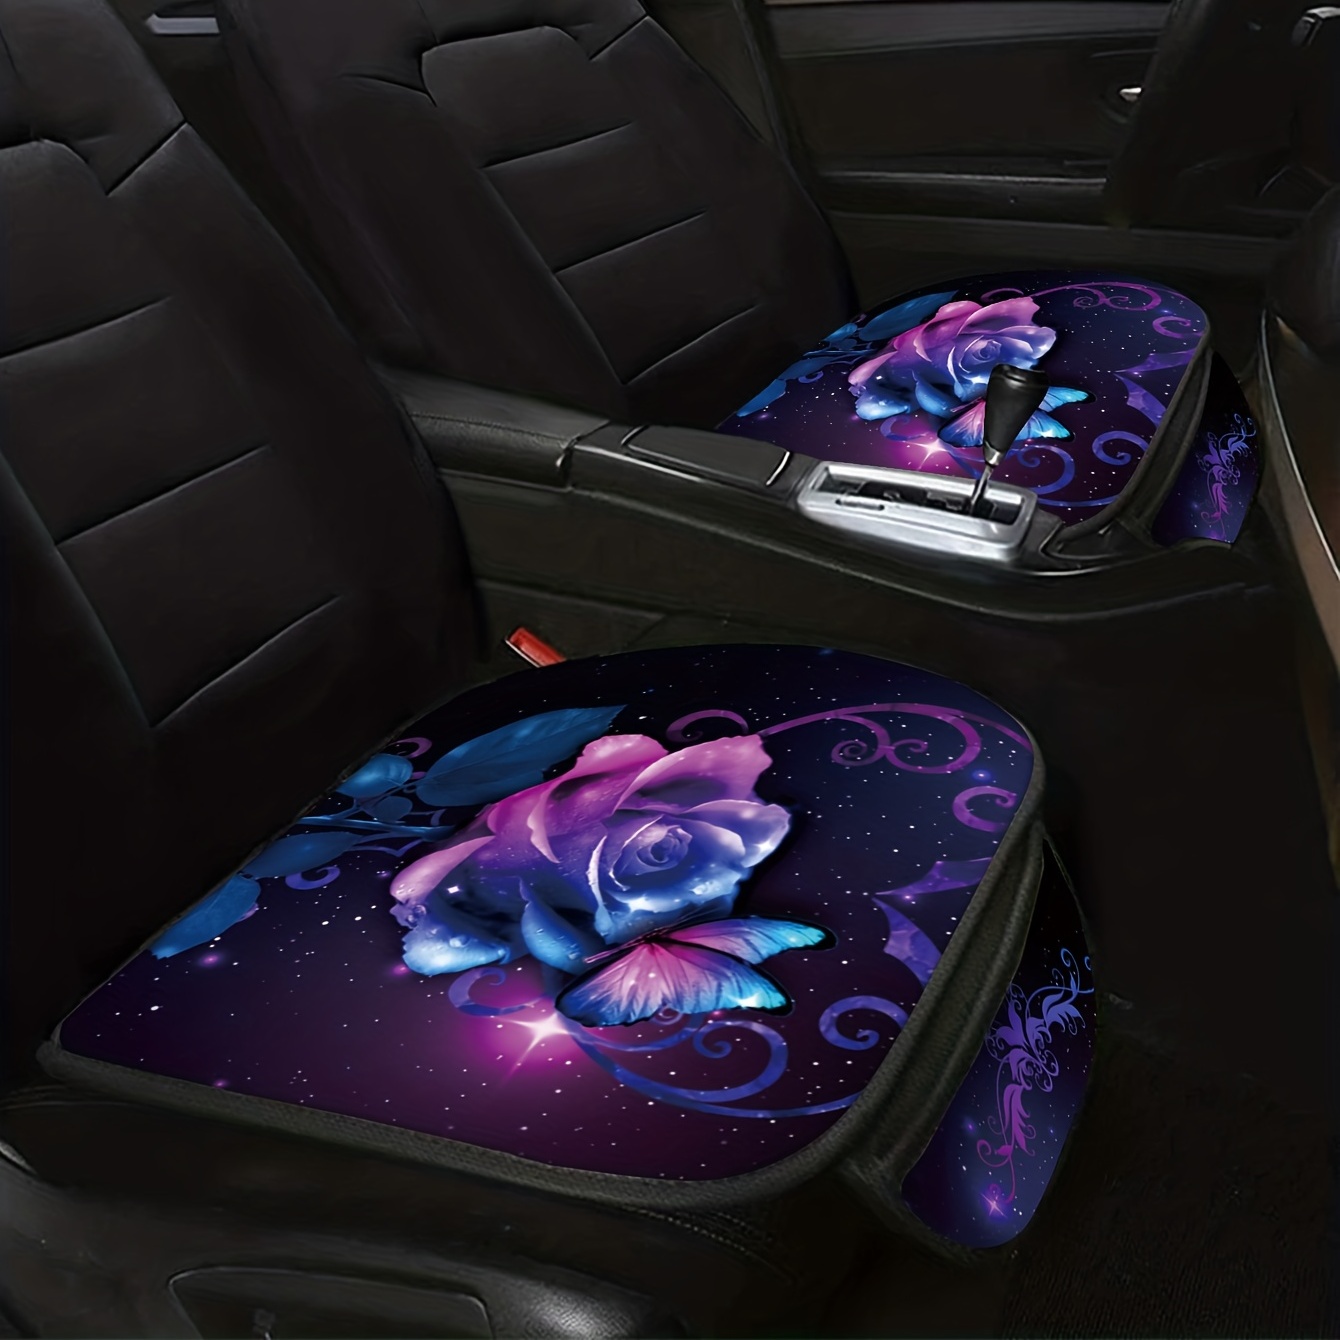 Luxurious Purple Rose Print Car Seat Cushions - Comfort And Style